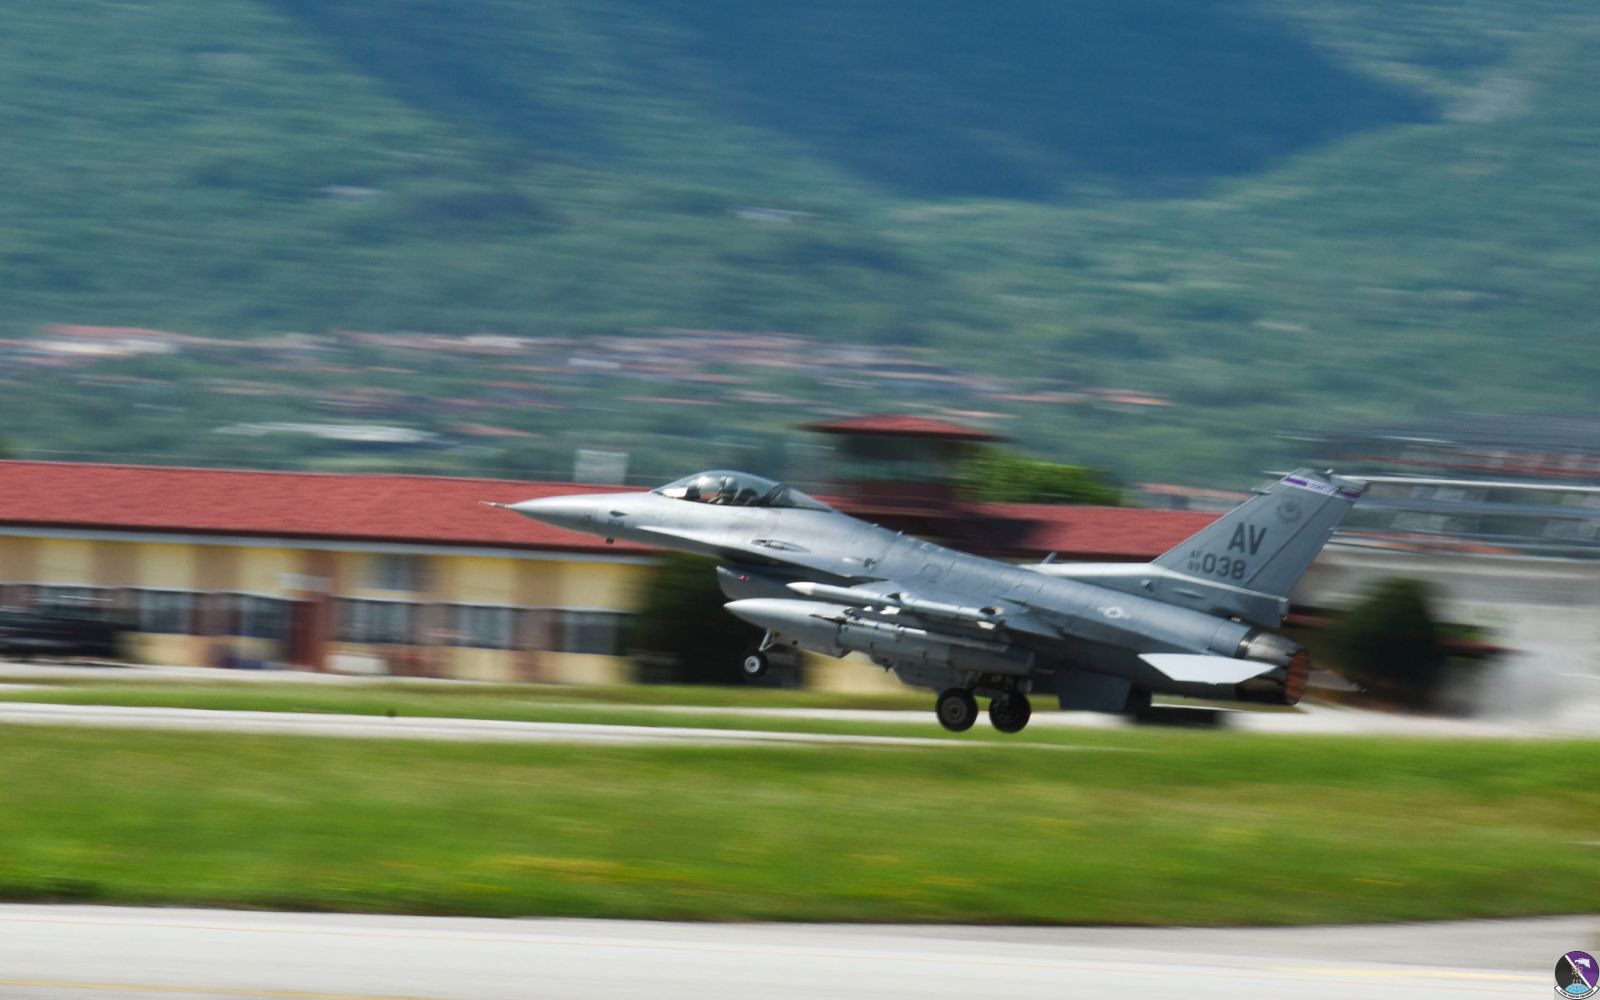 Jet takes off at Aviano